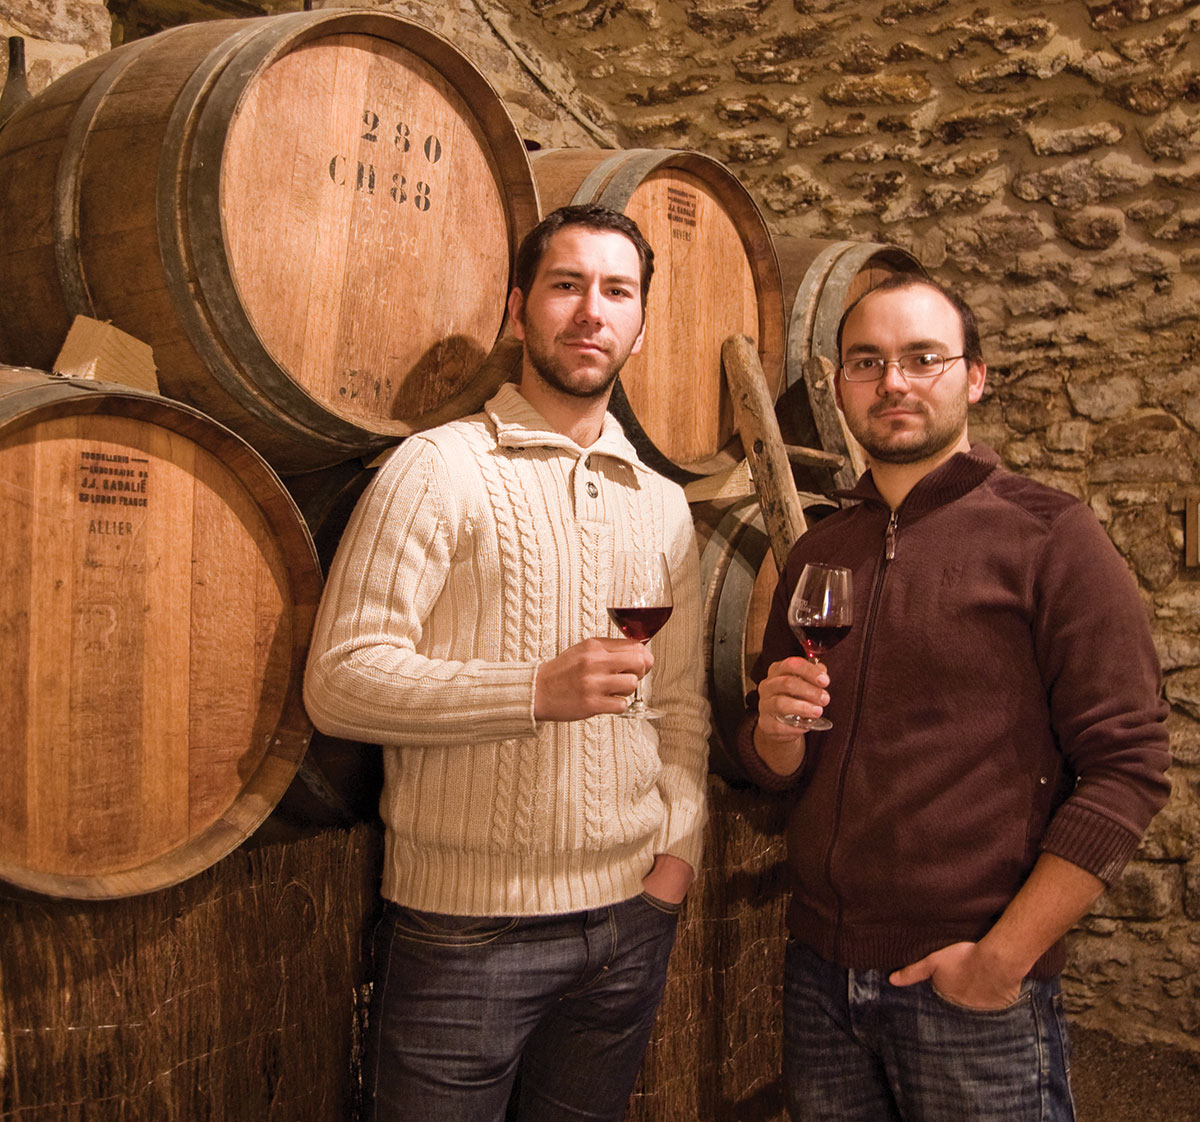 Sixth generation owners of Chateau Saint Nabor winery, brothers Jeremie and Raphael Castor.